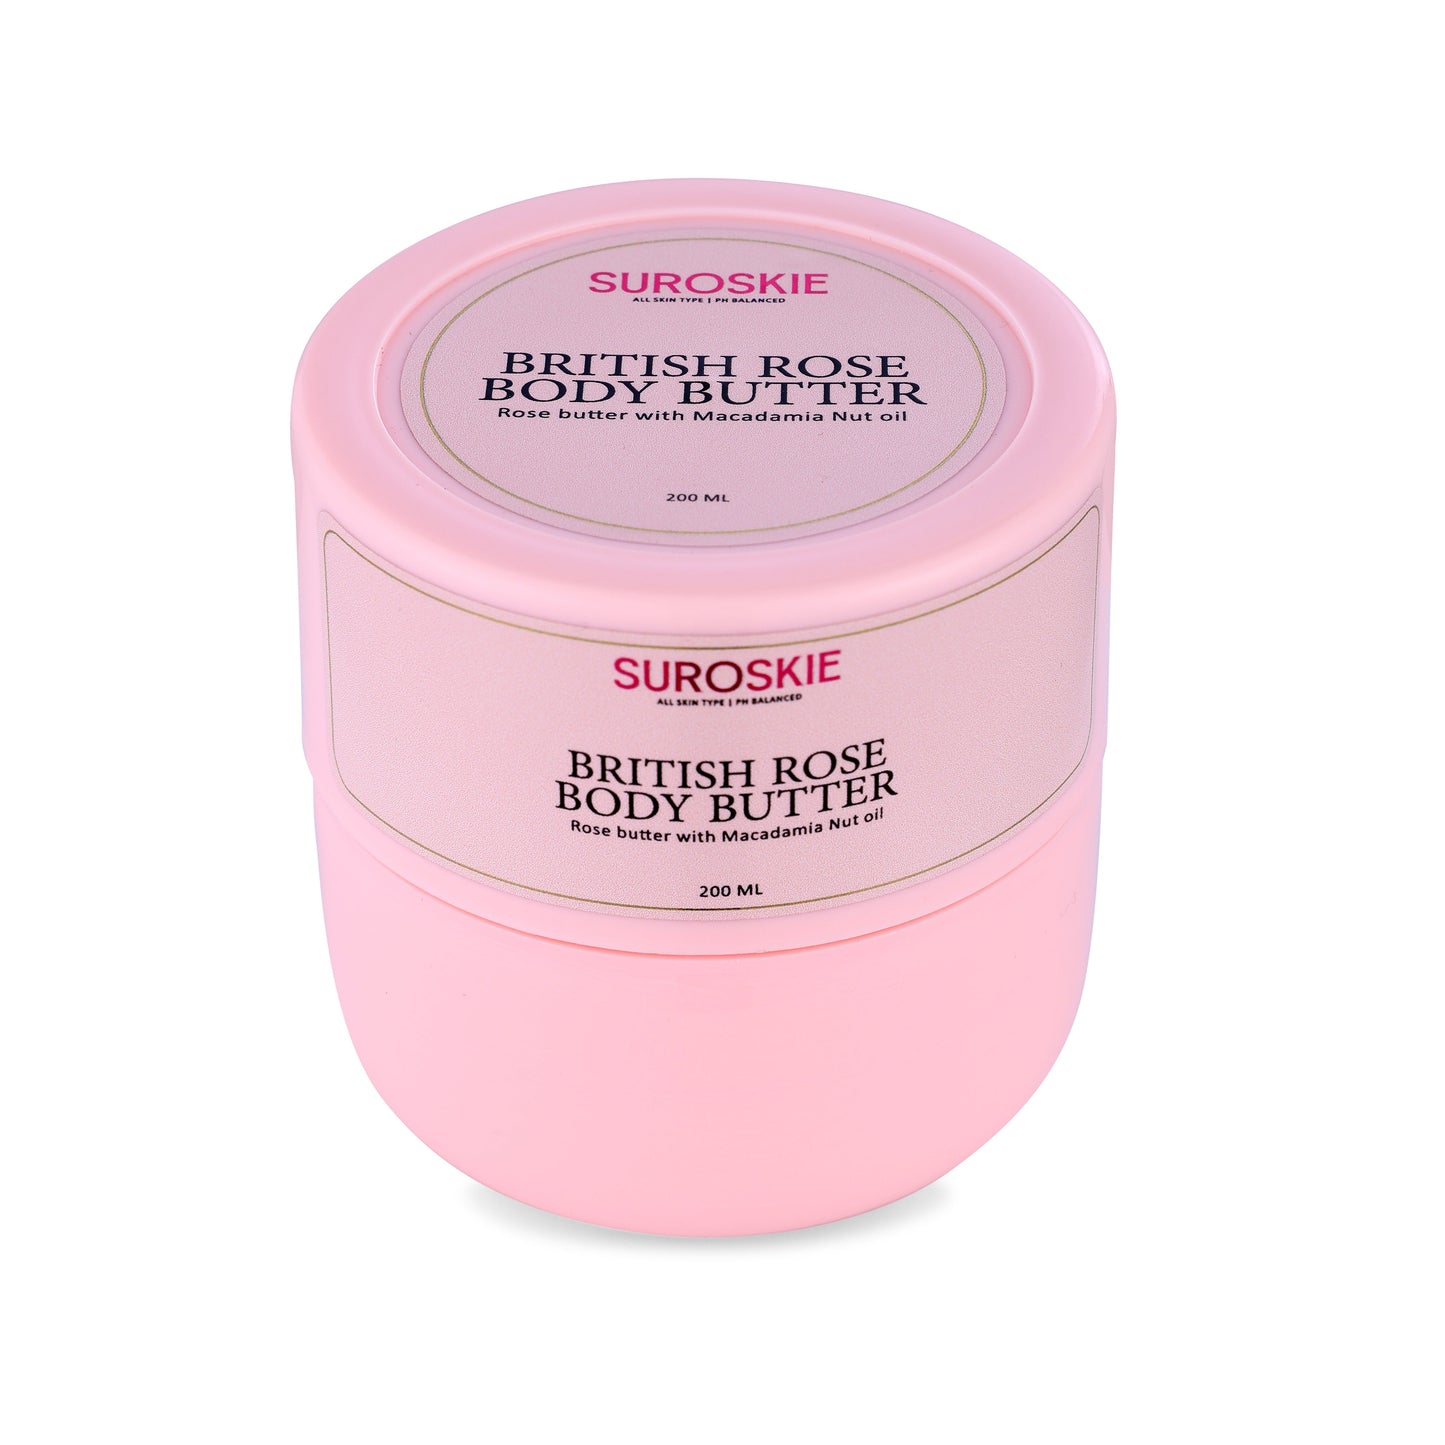 Pack of 2 British Rose Body Butter